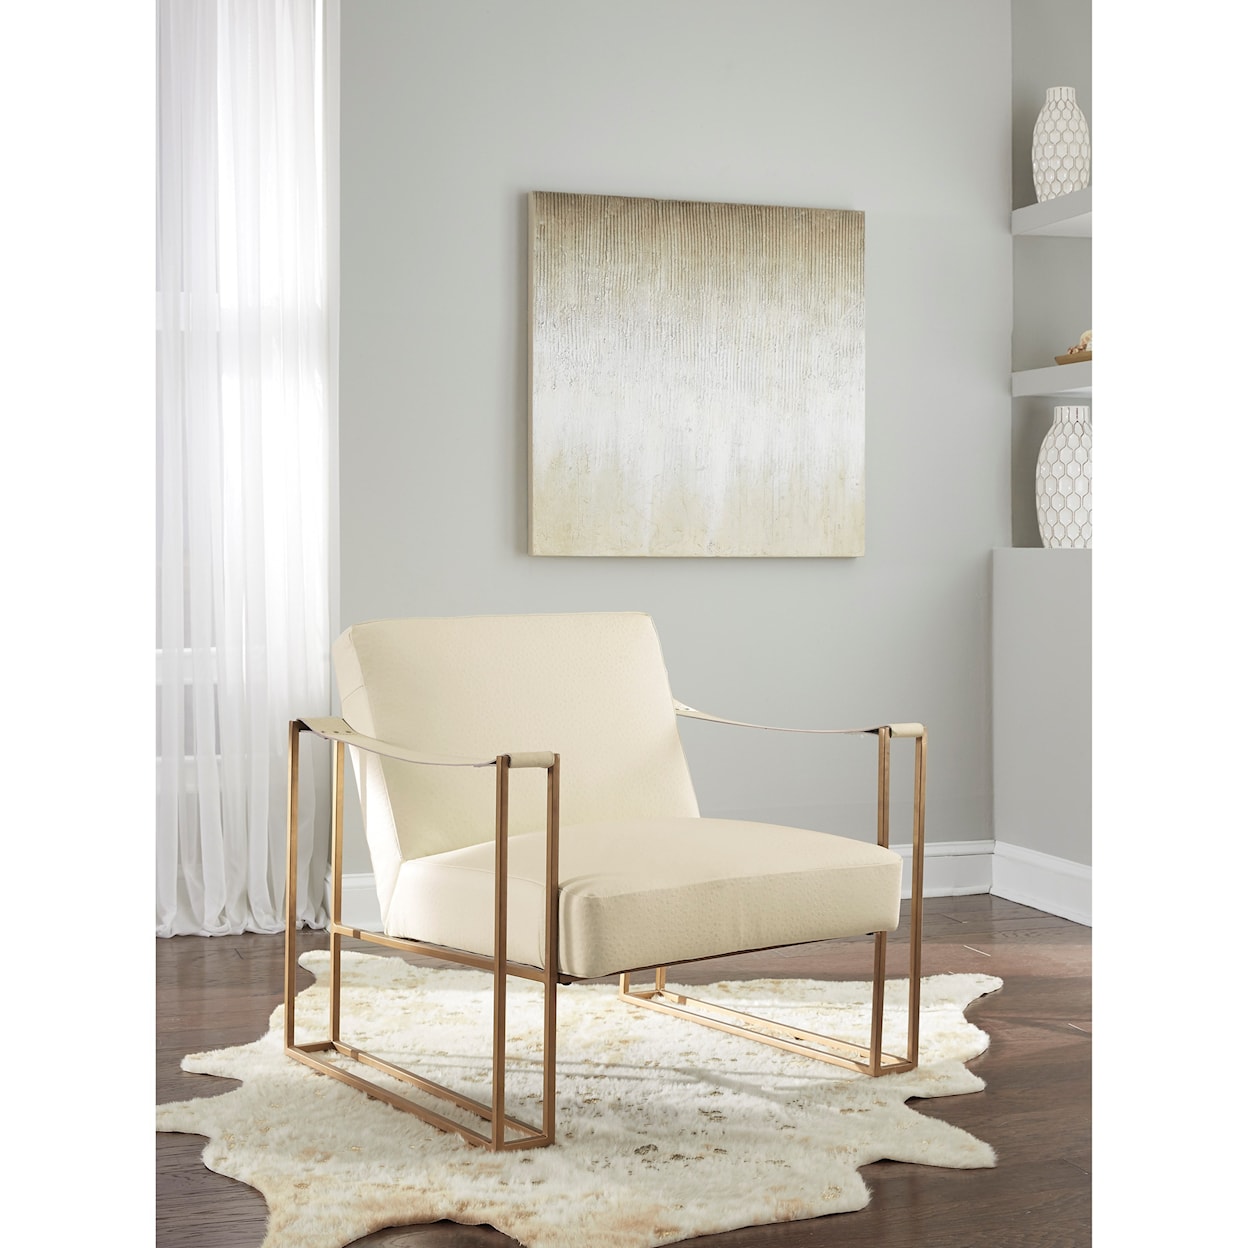 Signature Design by Ashley Kleemore Accent Chair